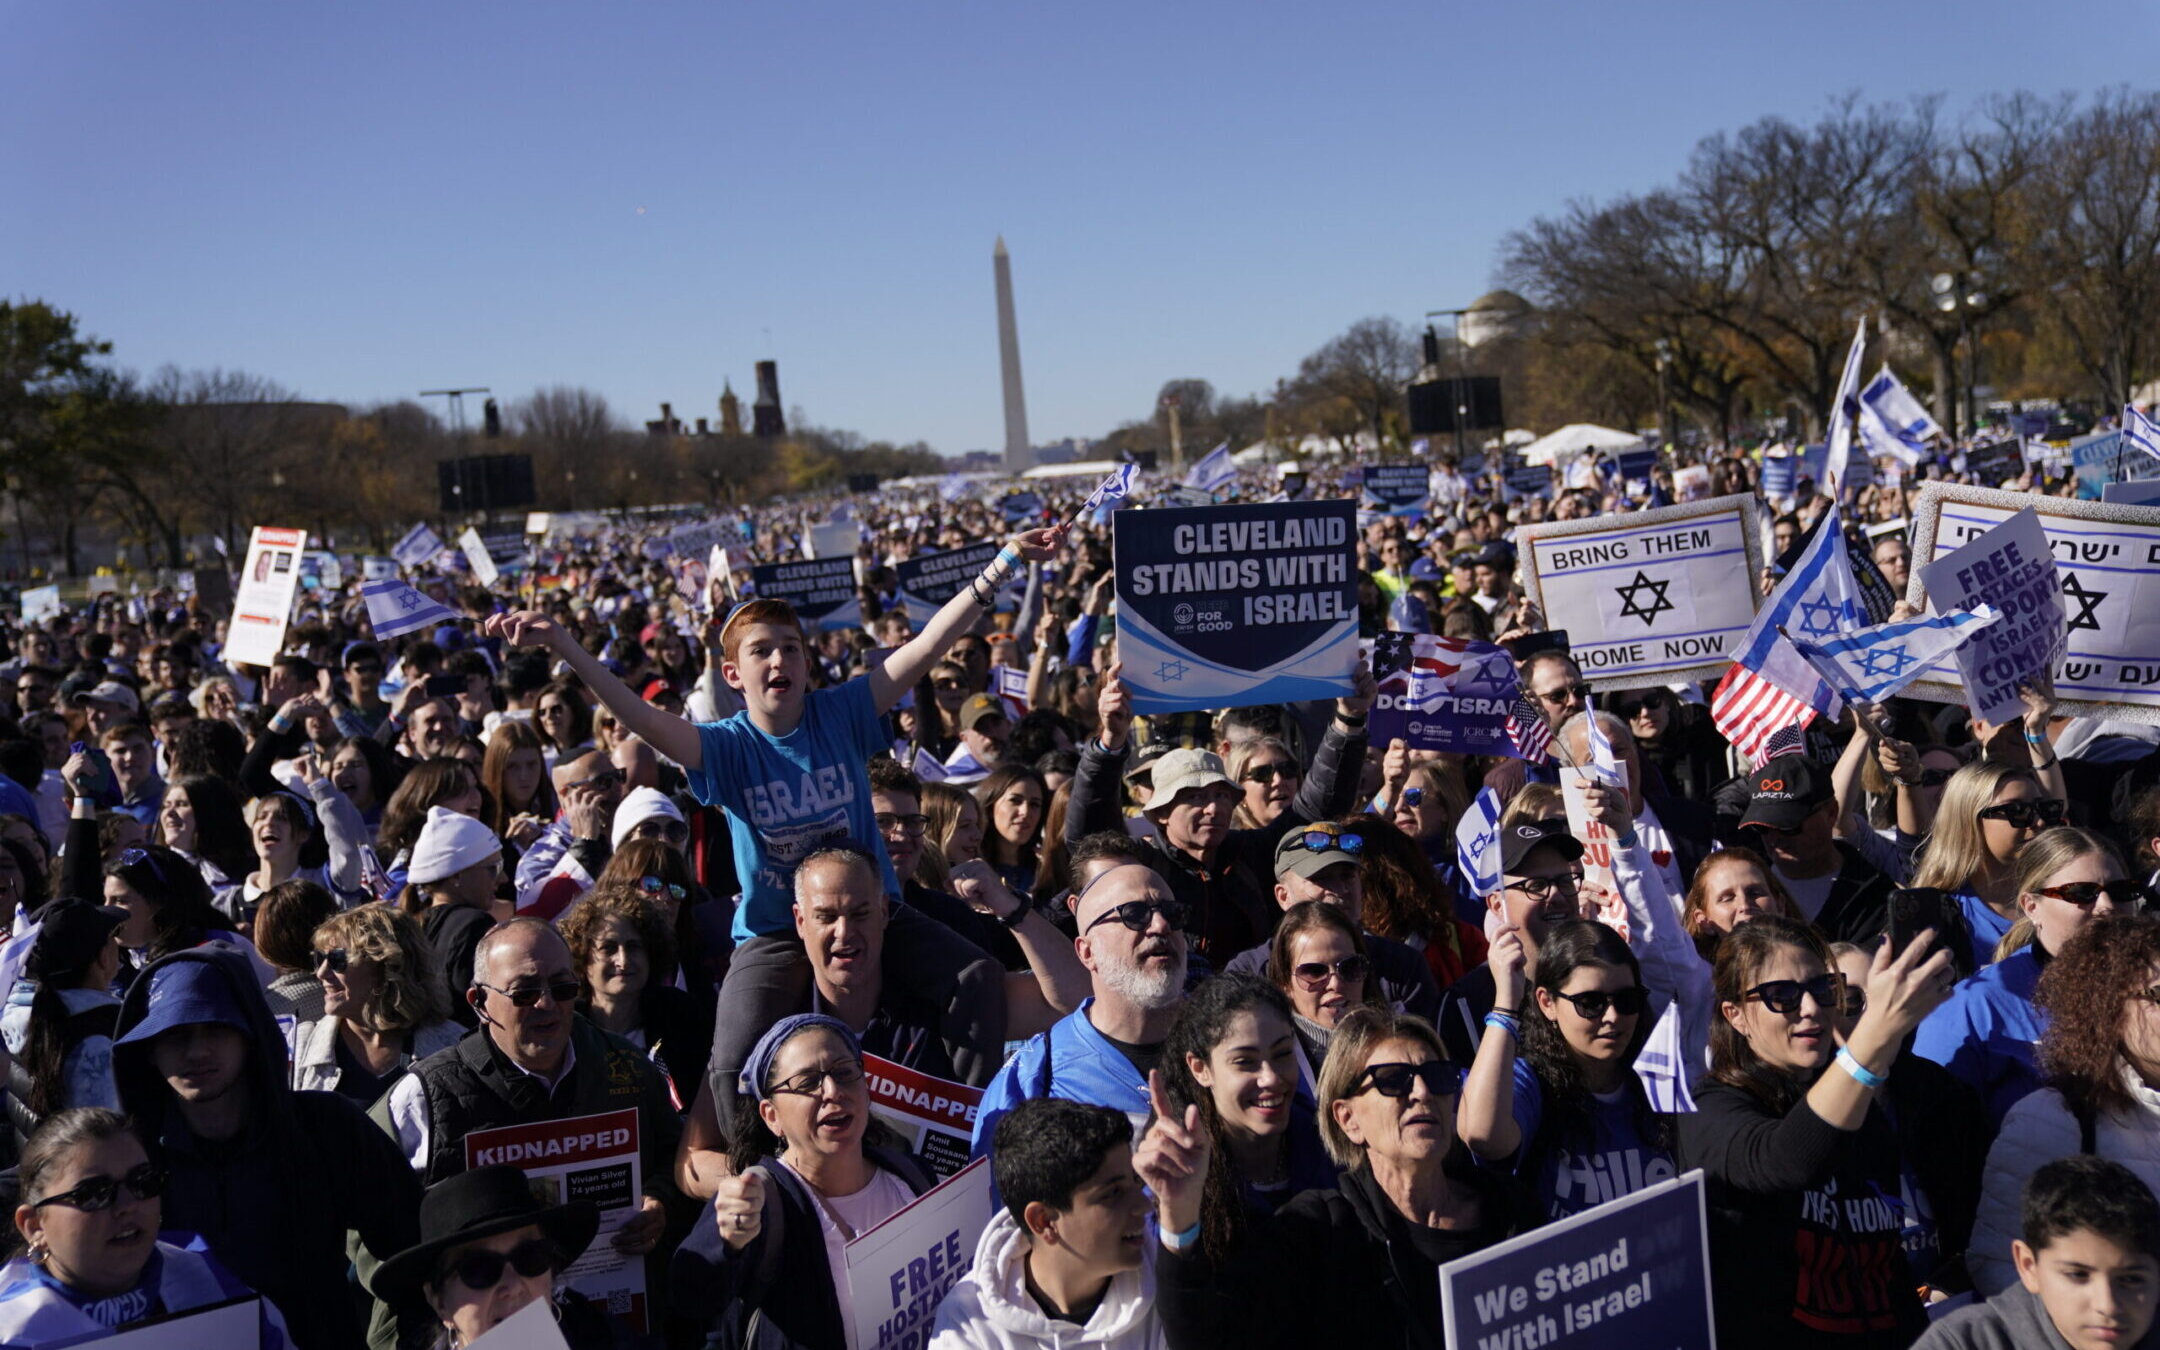 Demonstrators in support of Israel gather to denounce antisemitism and call for the release of Israeli hostages, on the National Mall in Washington, DC, Nov. 14, 2023. (Stefani Reynolds / AFP via Getty Images)